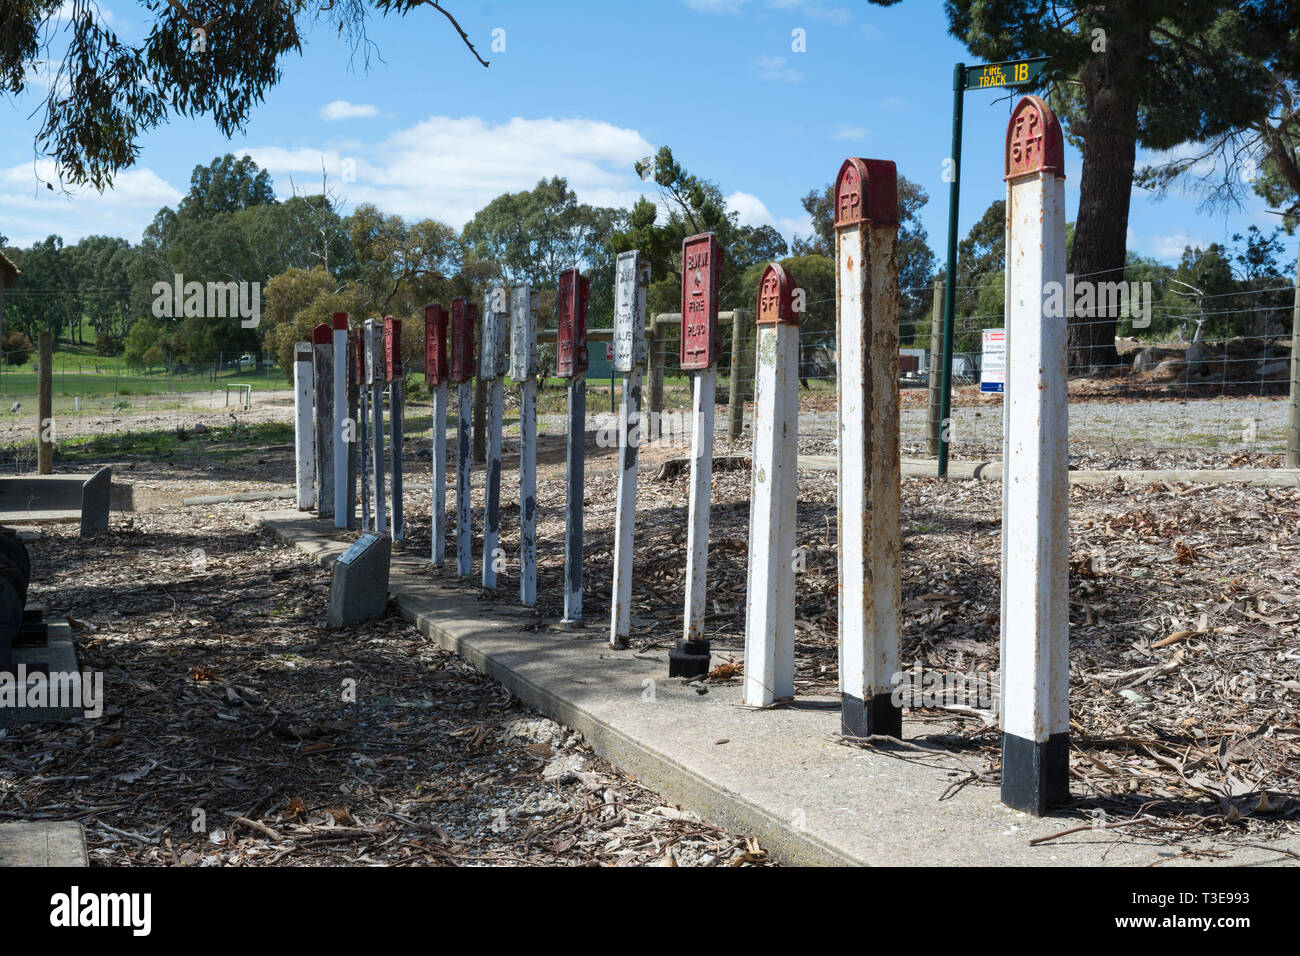 Williamstown, South Australia, Australia - September 30, 2017: A historical look at the various water indicator posts used between 1910 -1990. Situate Stock Photo